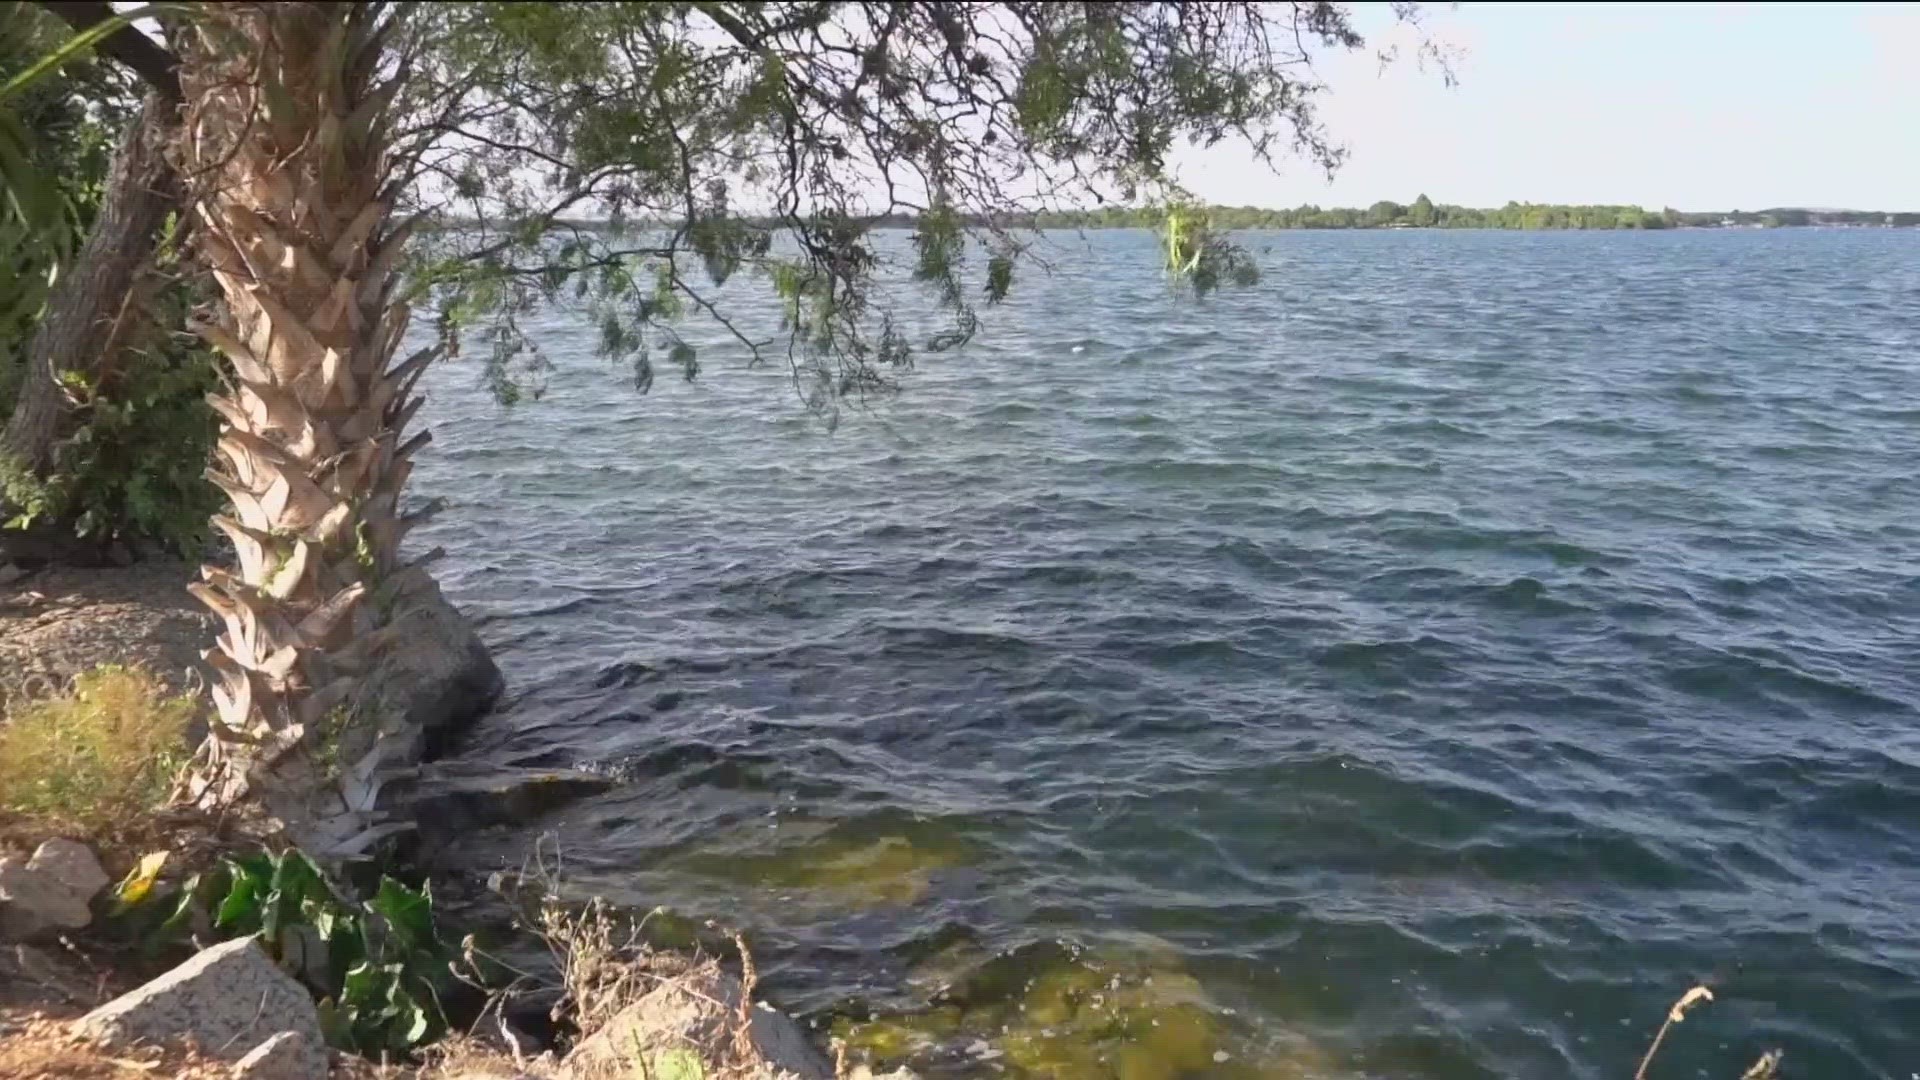 A rare infection from a microbe found in fresh water killed a person from Travis County. The person contracted a brain-infecting amoeba after swimming in Lake LBJ.